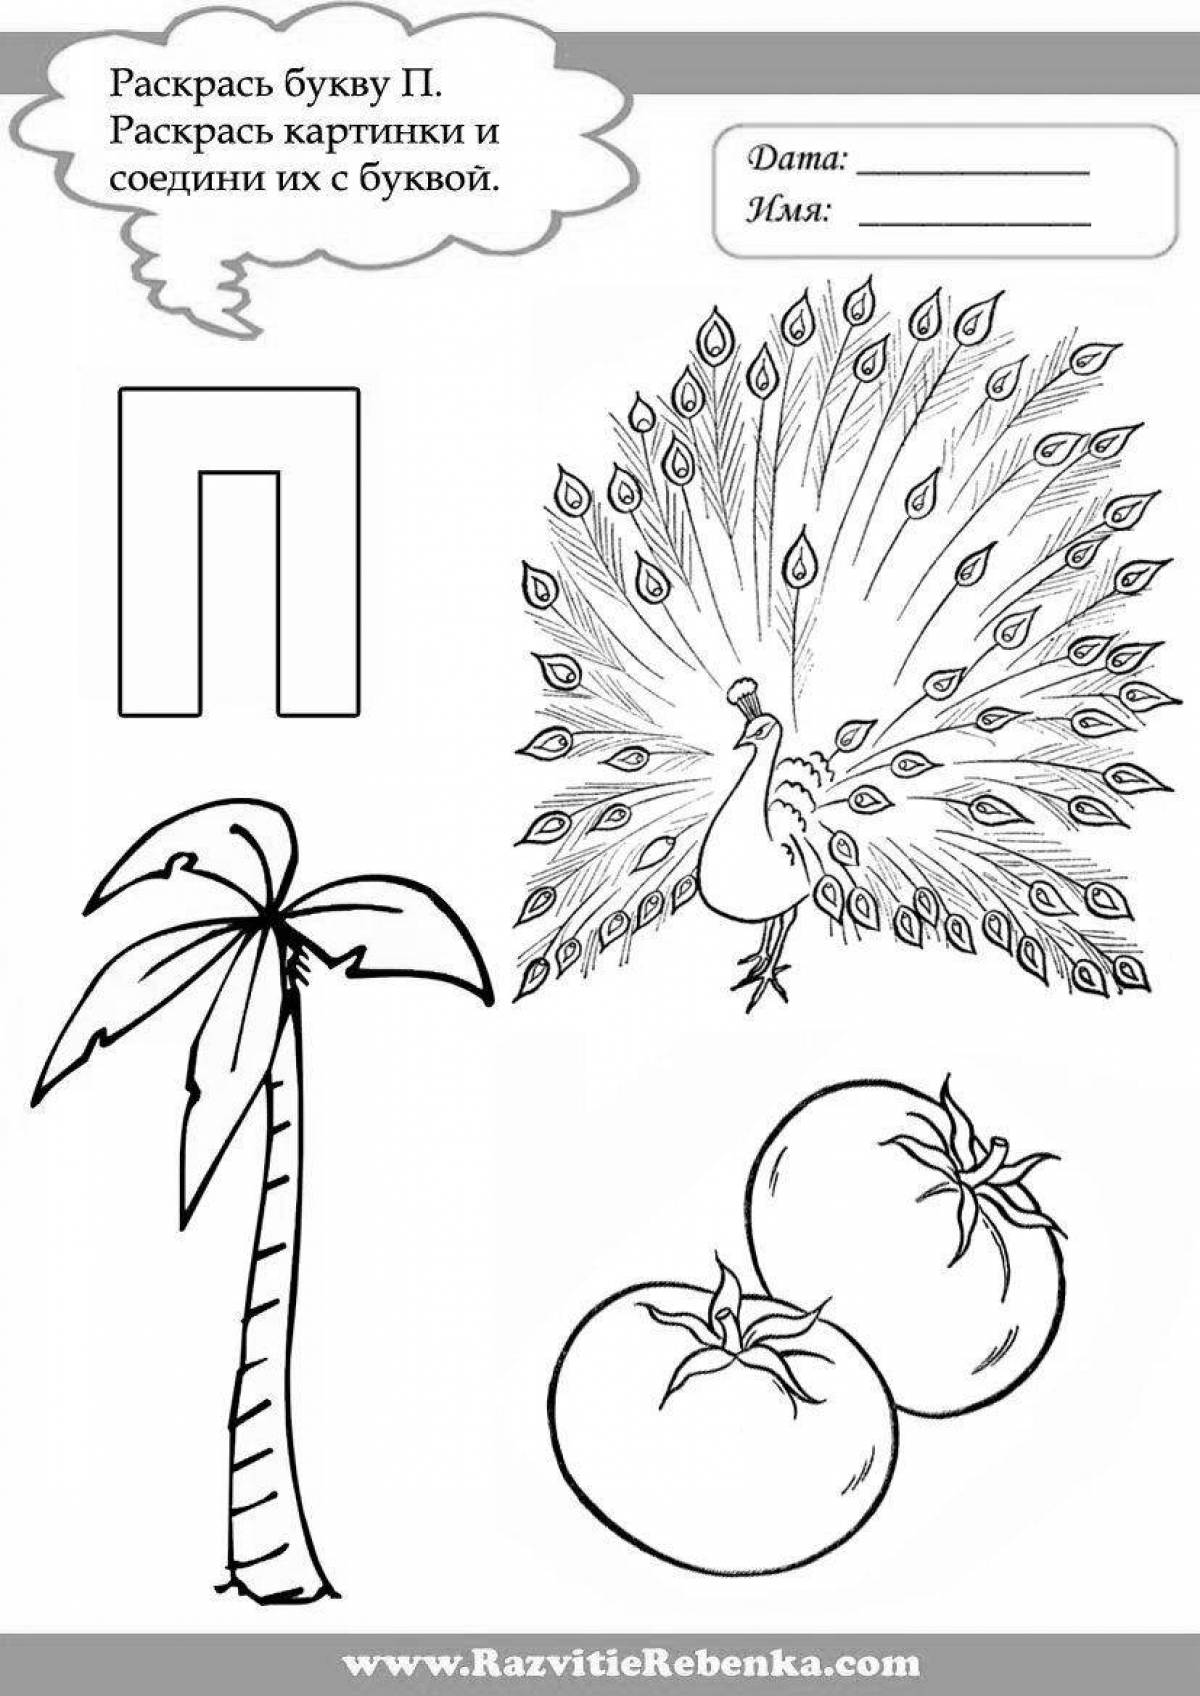 Playful p coloring page for preschoolers